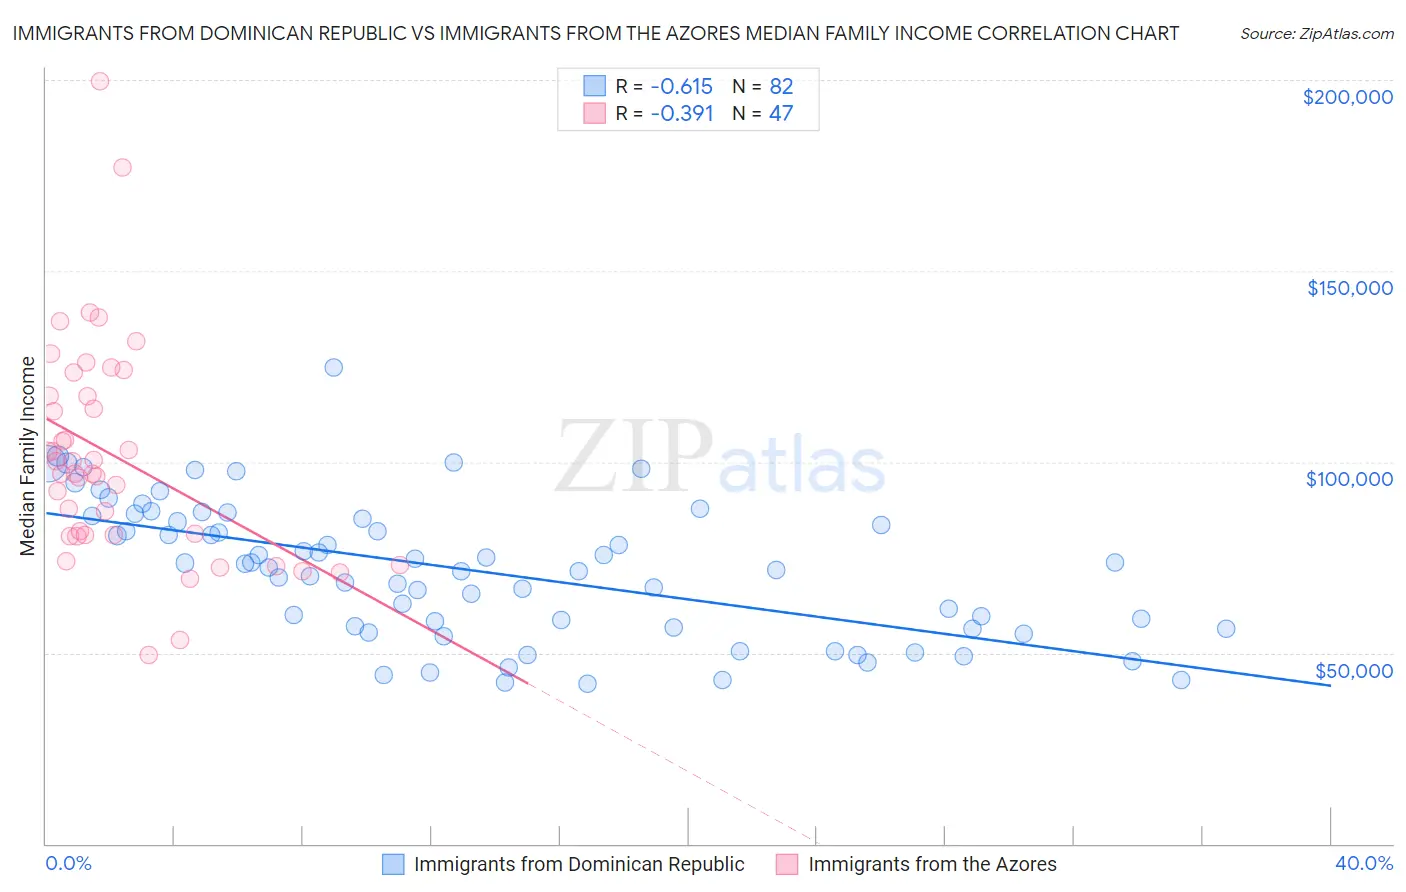 Immigrants from Dominican Republic vs Immigrants from the Azores Median Family Income